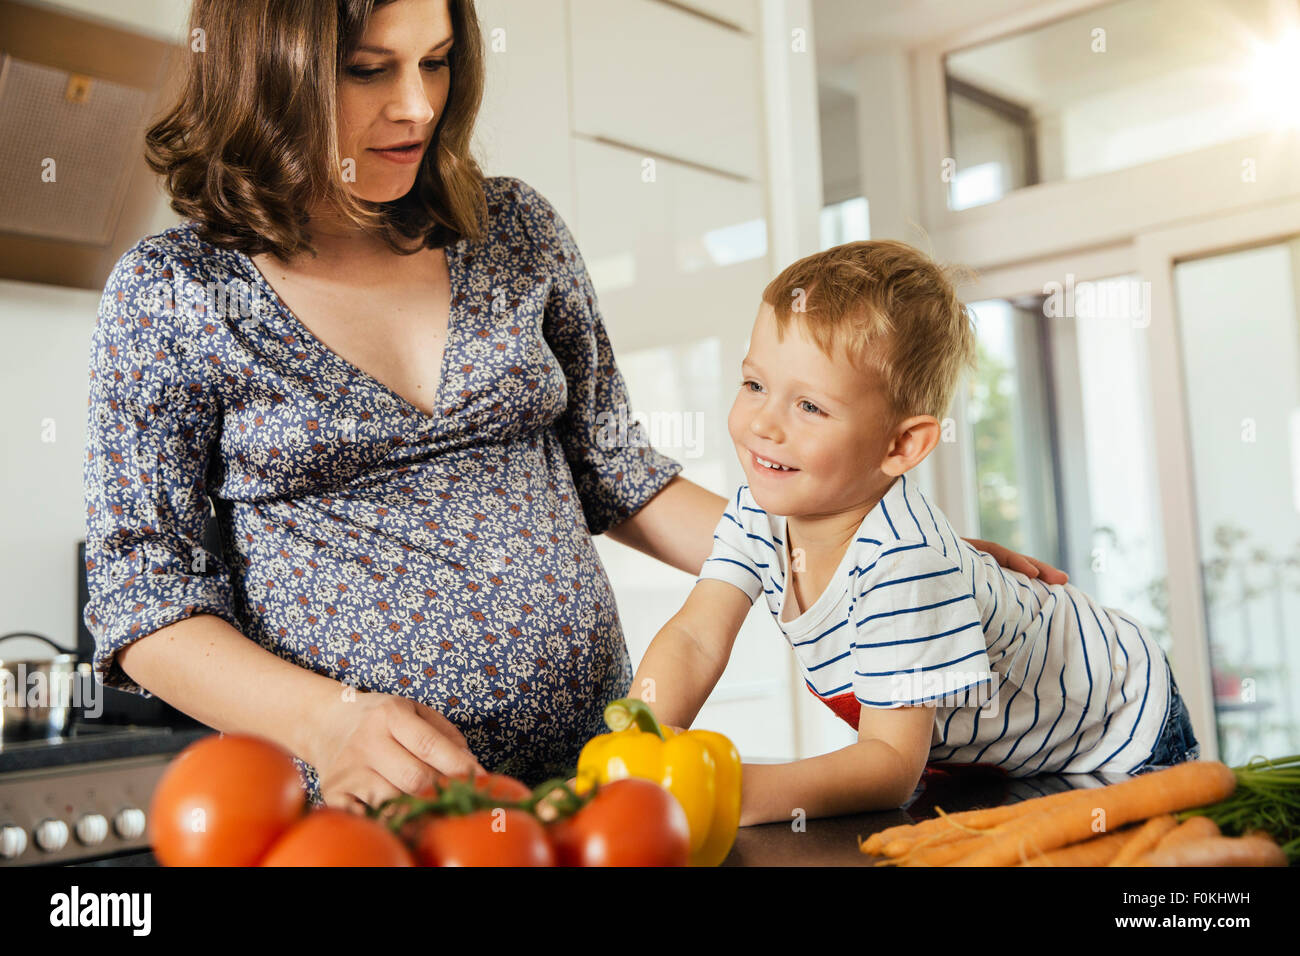 Pregnant woman with her little son in the kitchen preparing vegetables Stock Photo